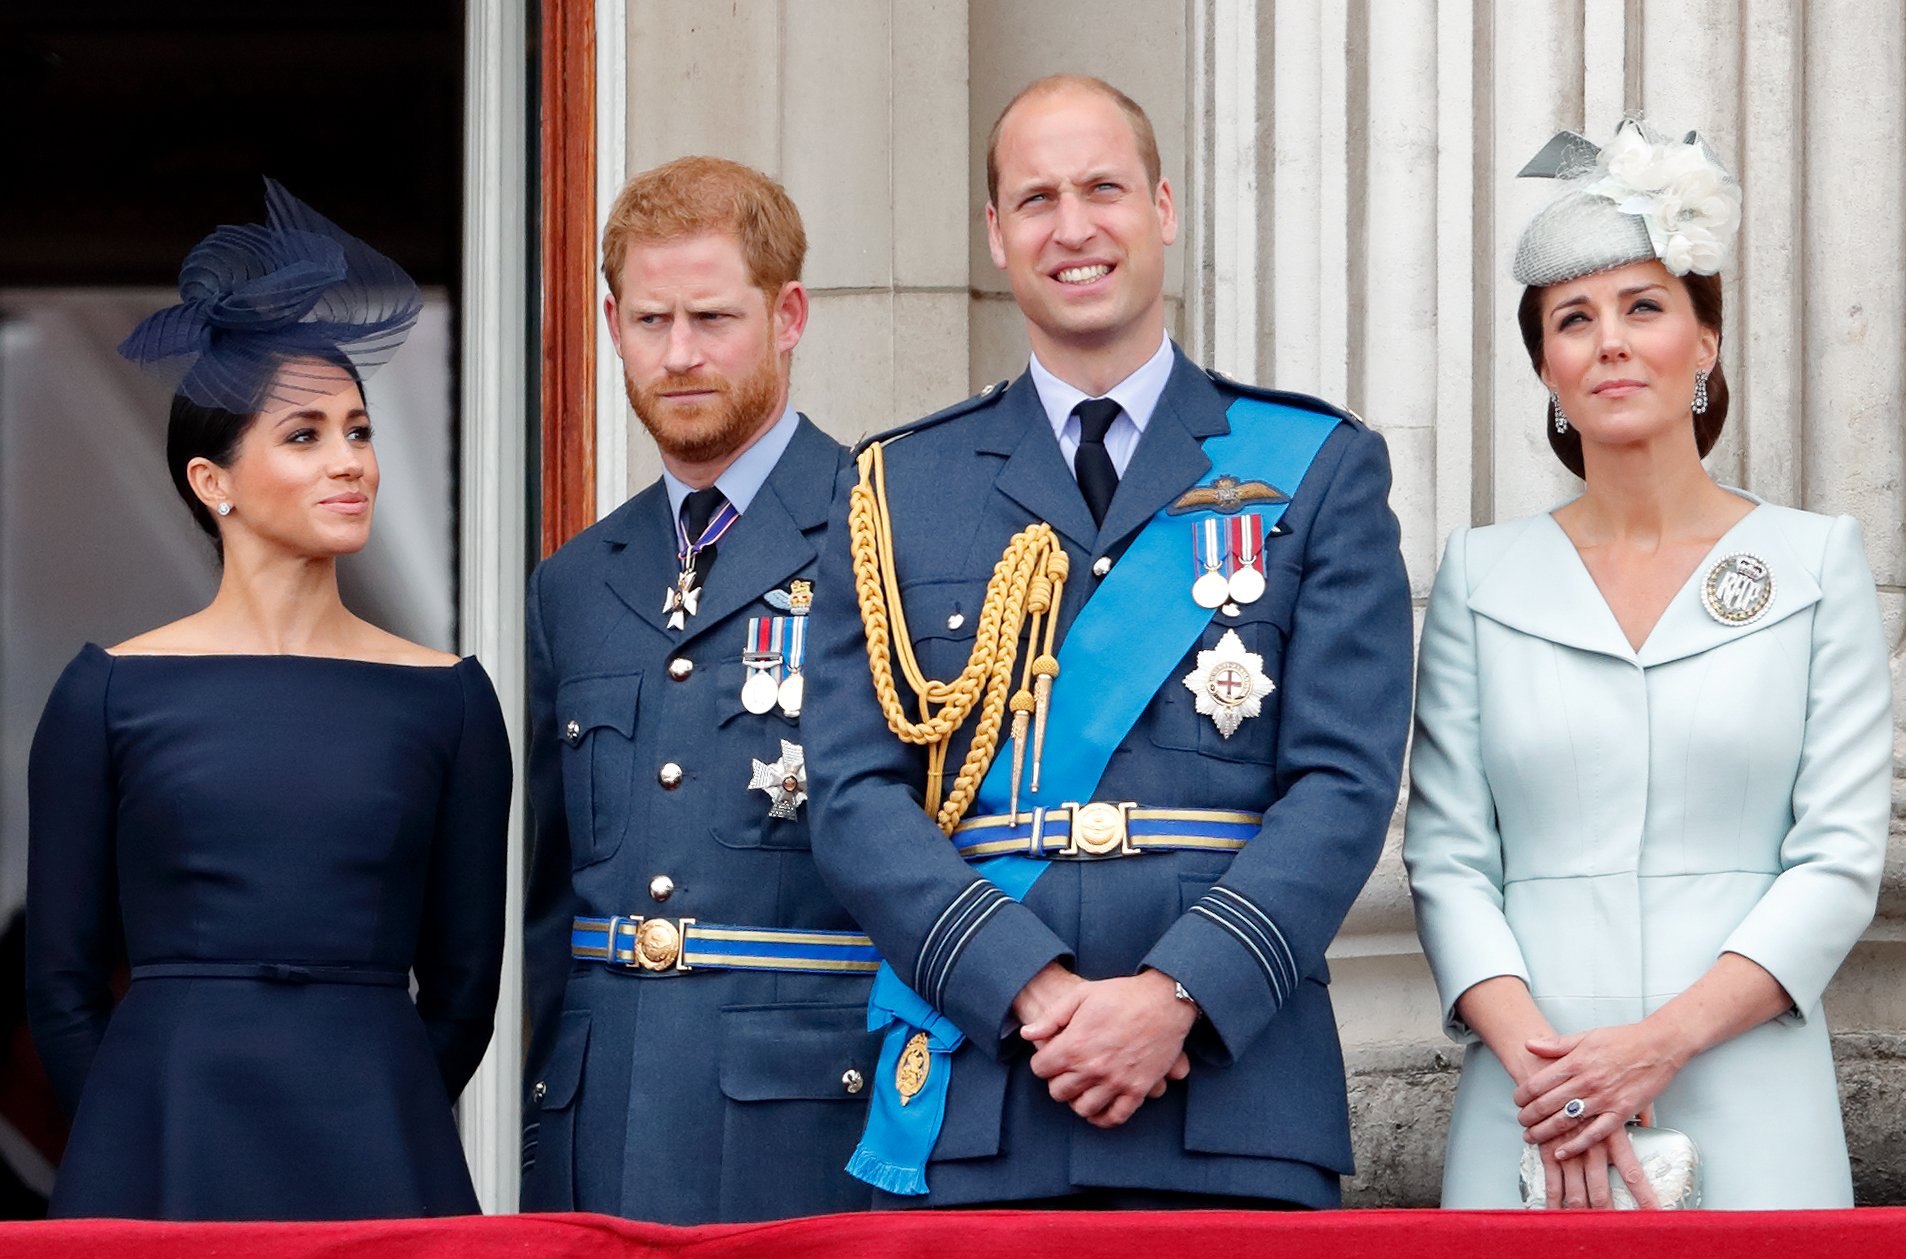 Meghan Markle, Prince Harry, Prince William and Kate Middleton watching a flypast from the balcony of Buckingham Palace on July 10, 2018 in London, England. | Source: Getty Images